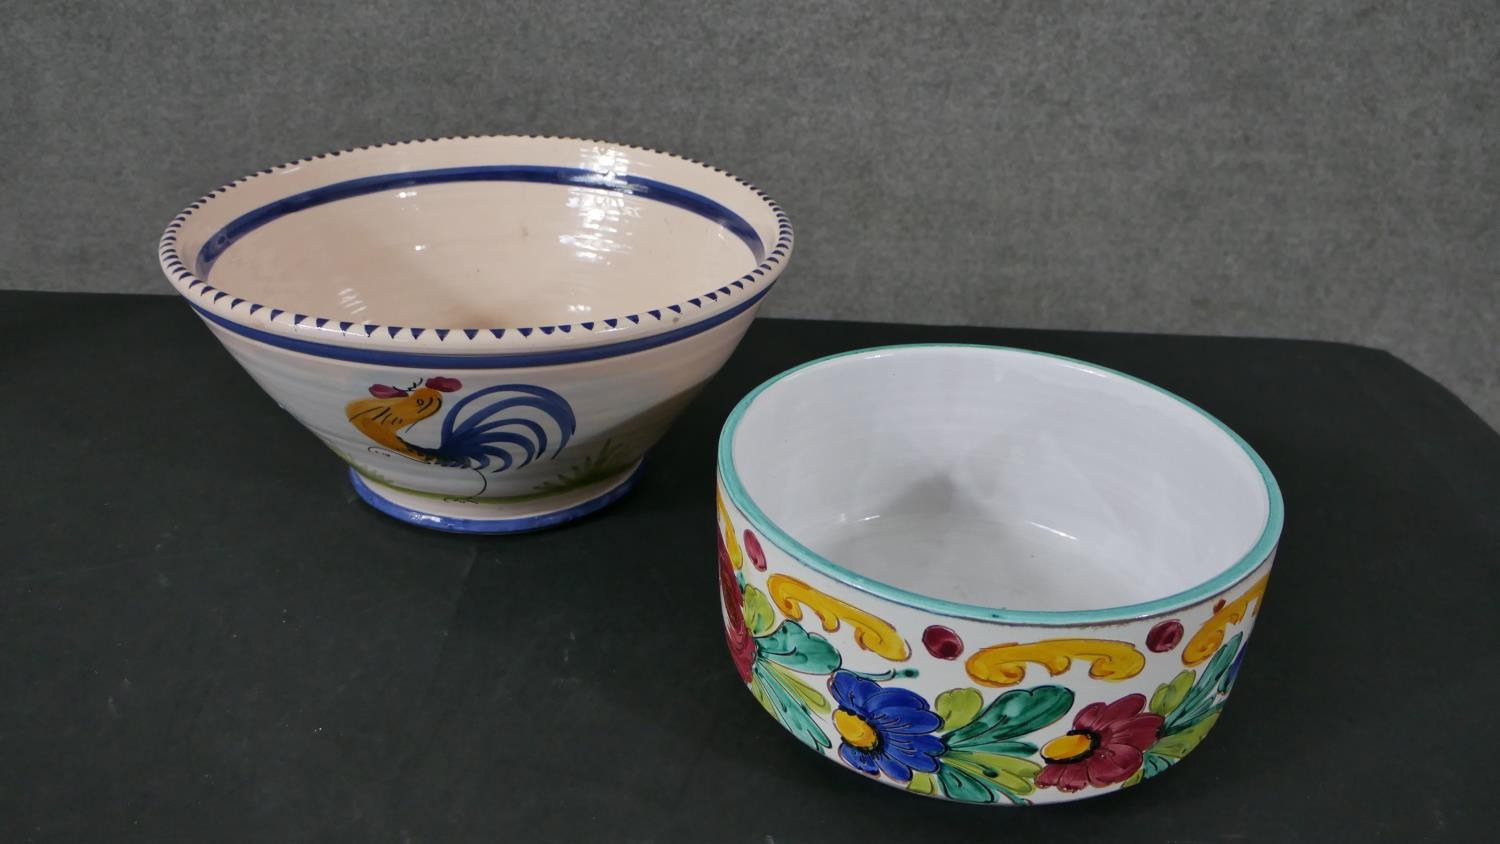 A large Portuguese hand painted ceramic rooster bowl along with a Majolica floral design bowl. D.